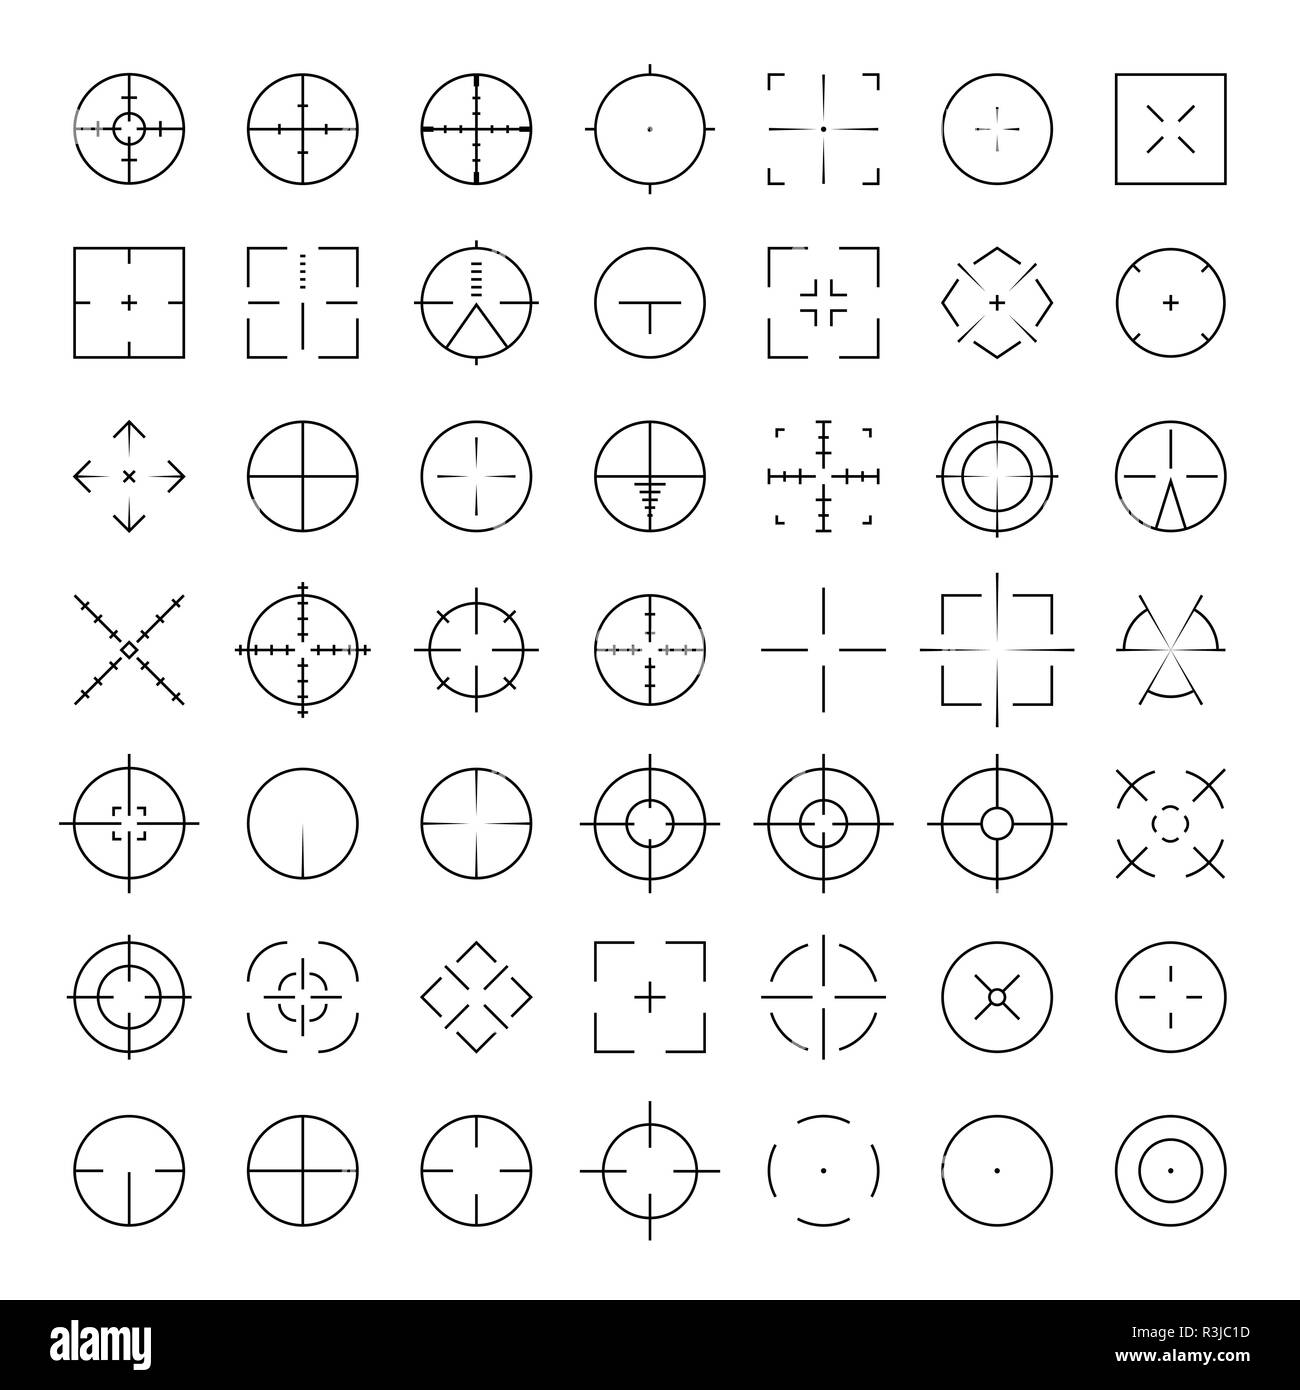 Automatic rifle sniper scope crosshairs thinline icon set. AR Collimator sight glyphs. Military war gun aim silhouettes Stock Vector